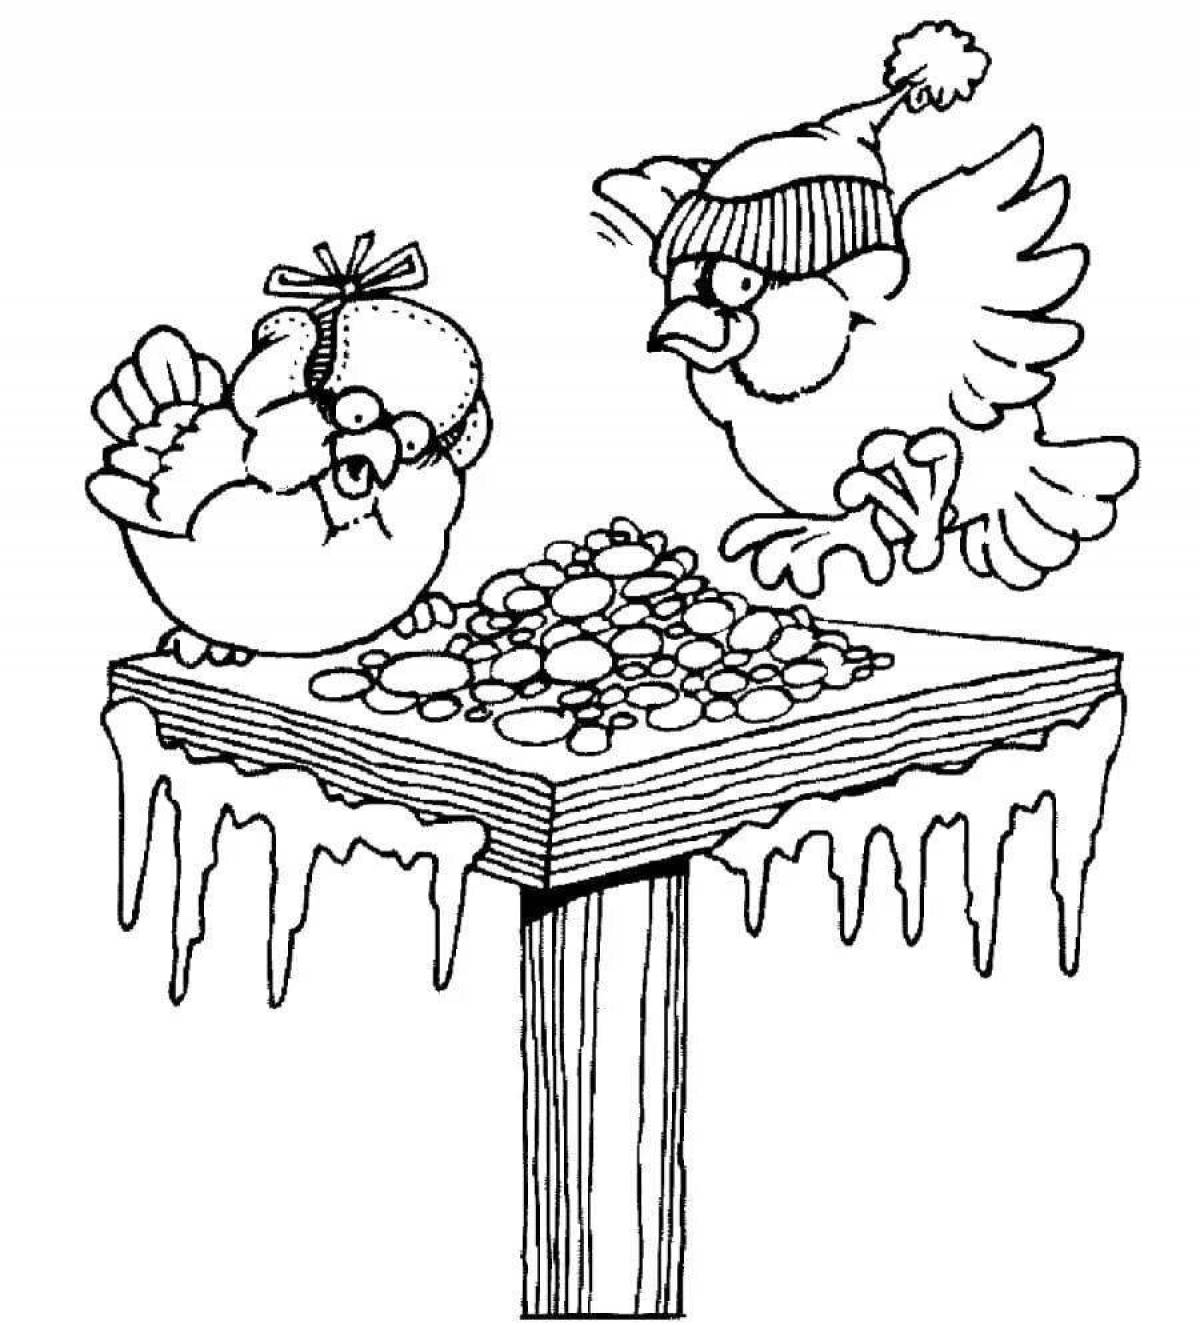 Awesome bird feeder coloring page for kids